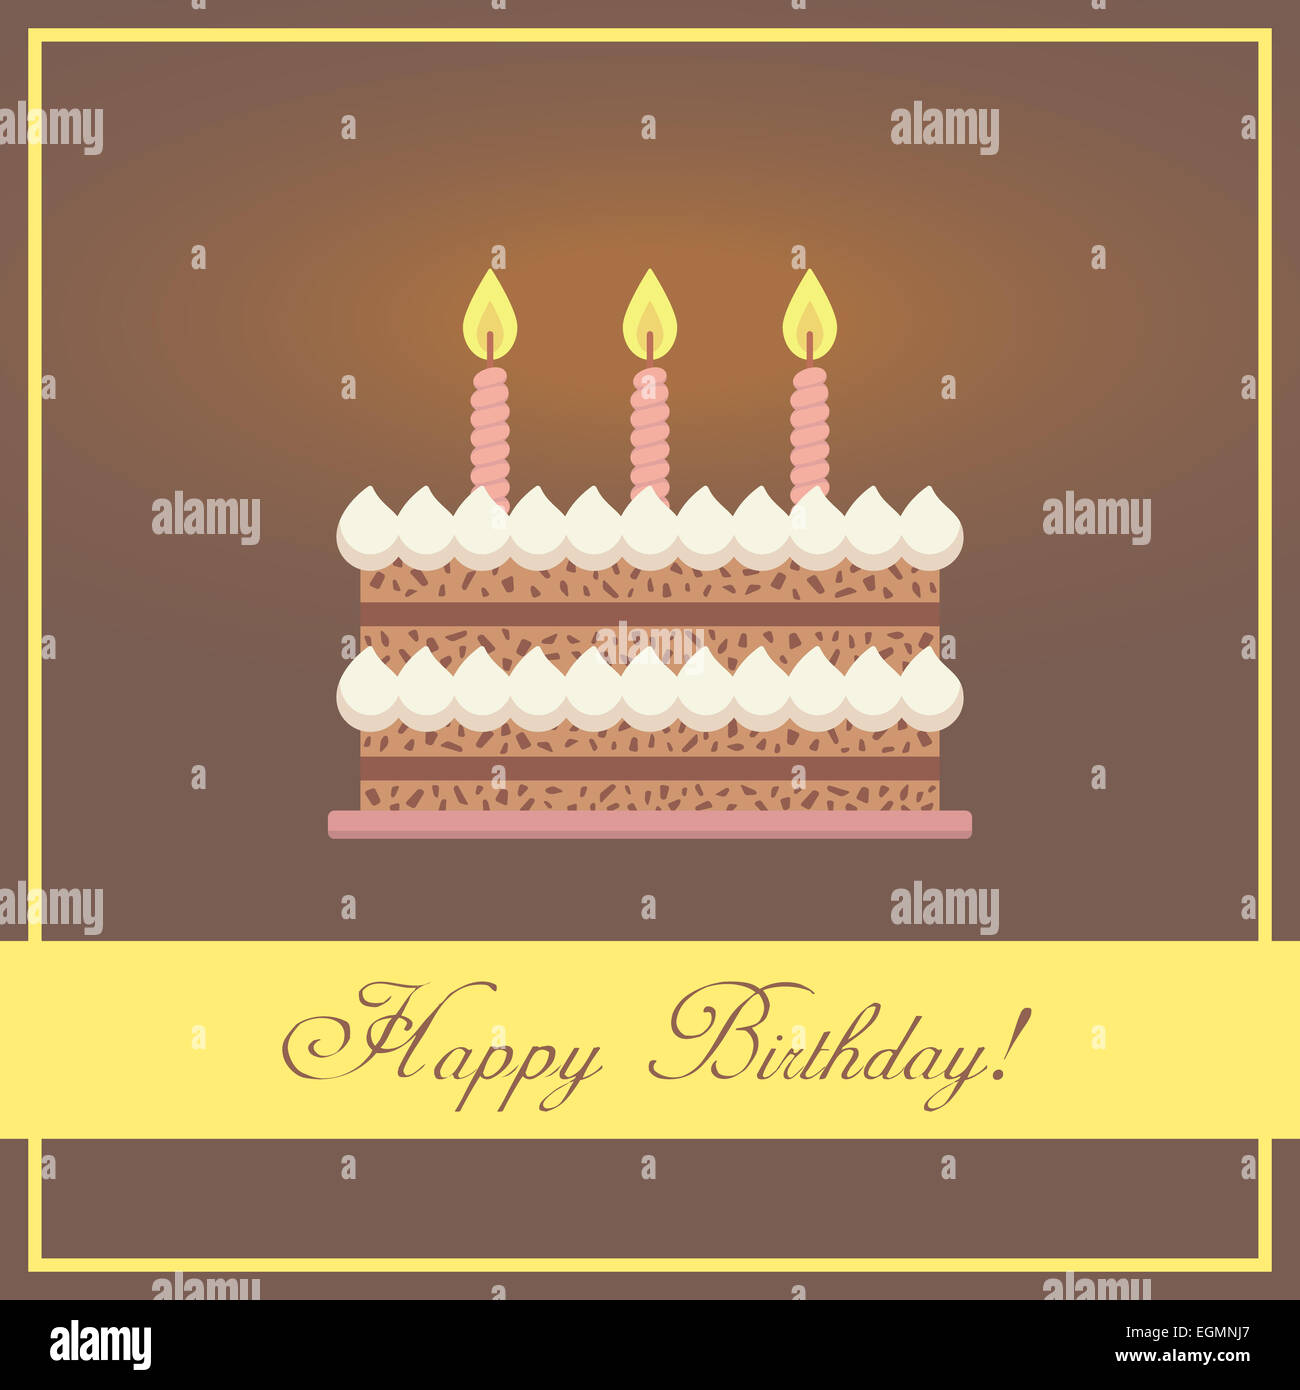 Flat Design Happy Birthday Greeting Card with Chocolate Cake, Whipped Cream and Pink Burning Candles Placed in Abstract Frame Plus Congratulation Words on Brown Background Stock Photo